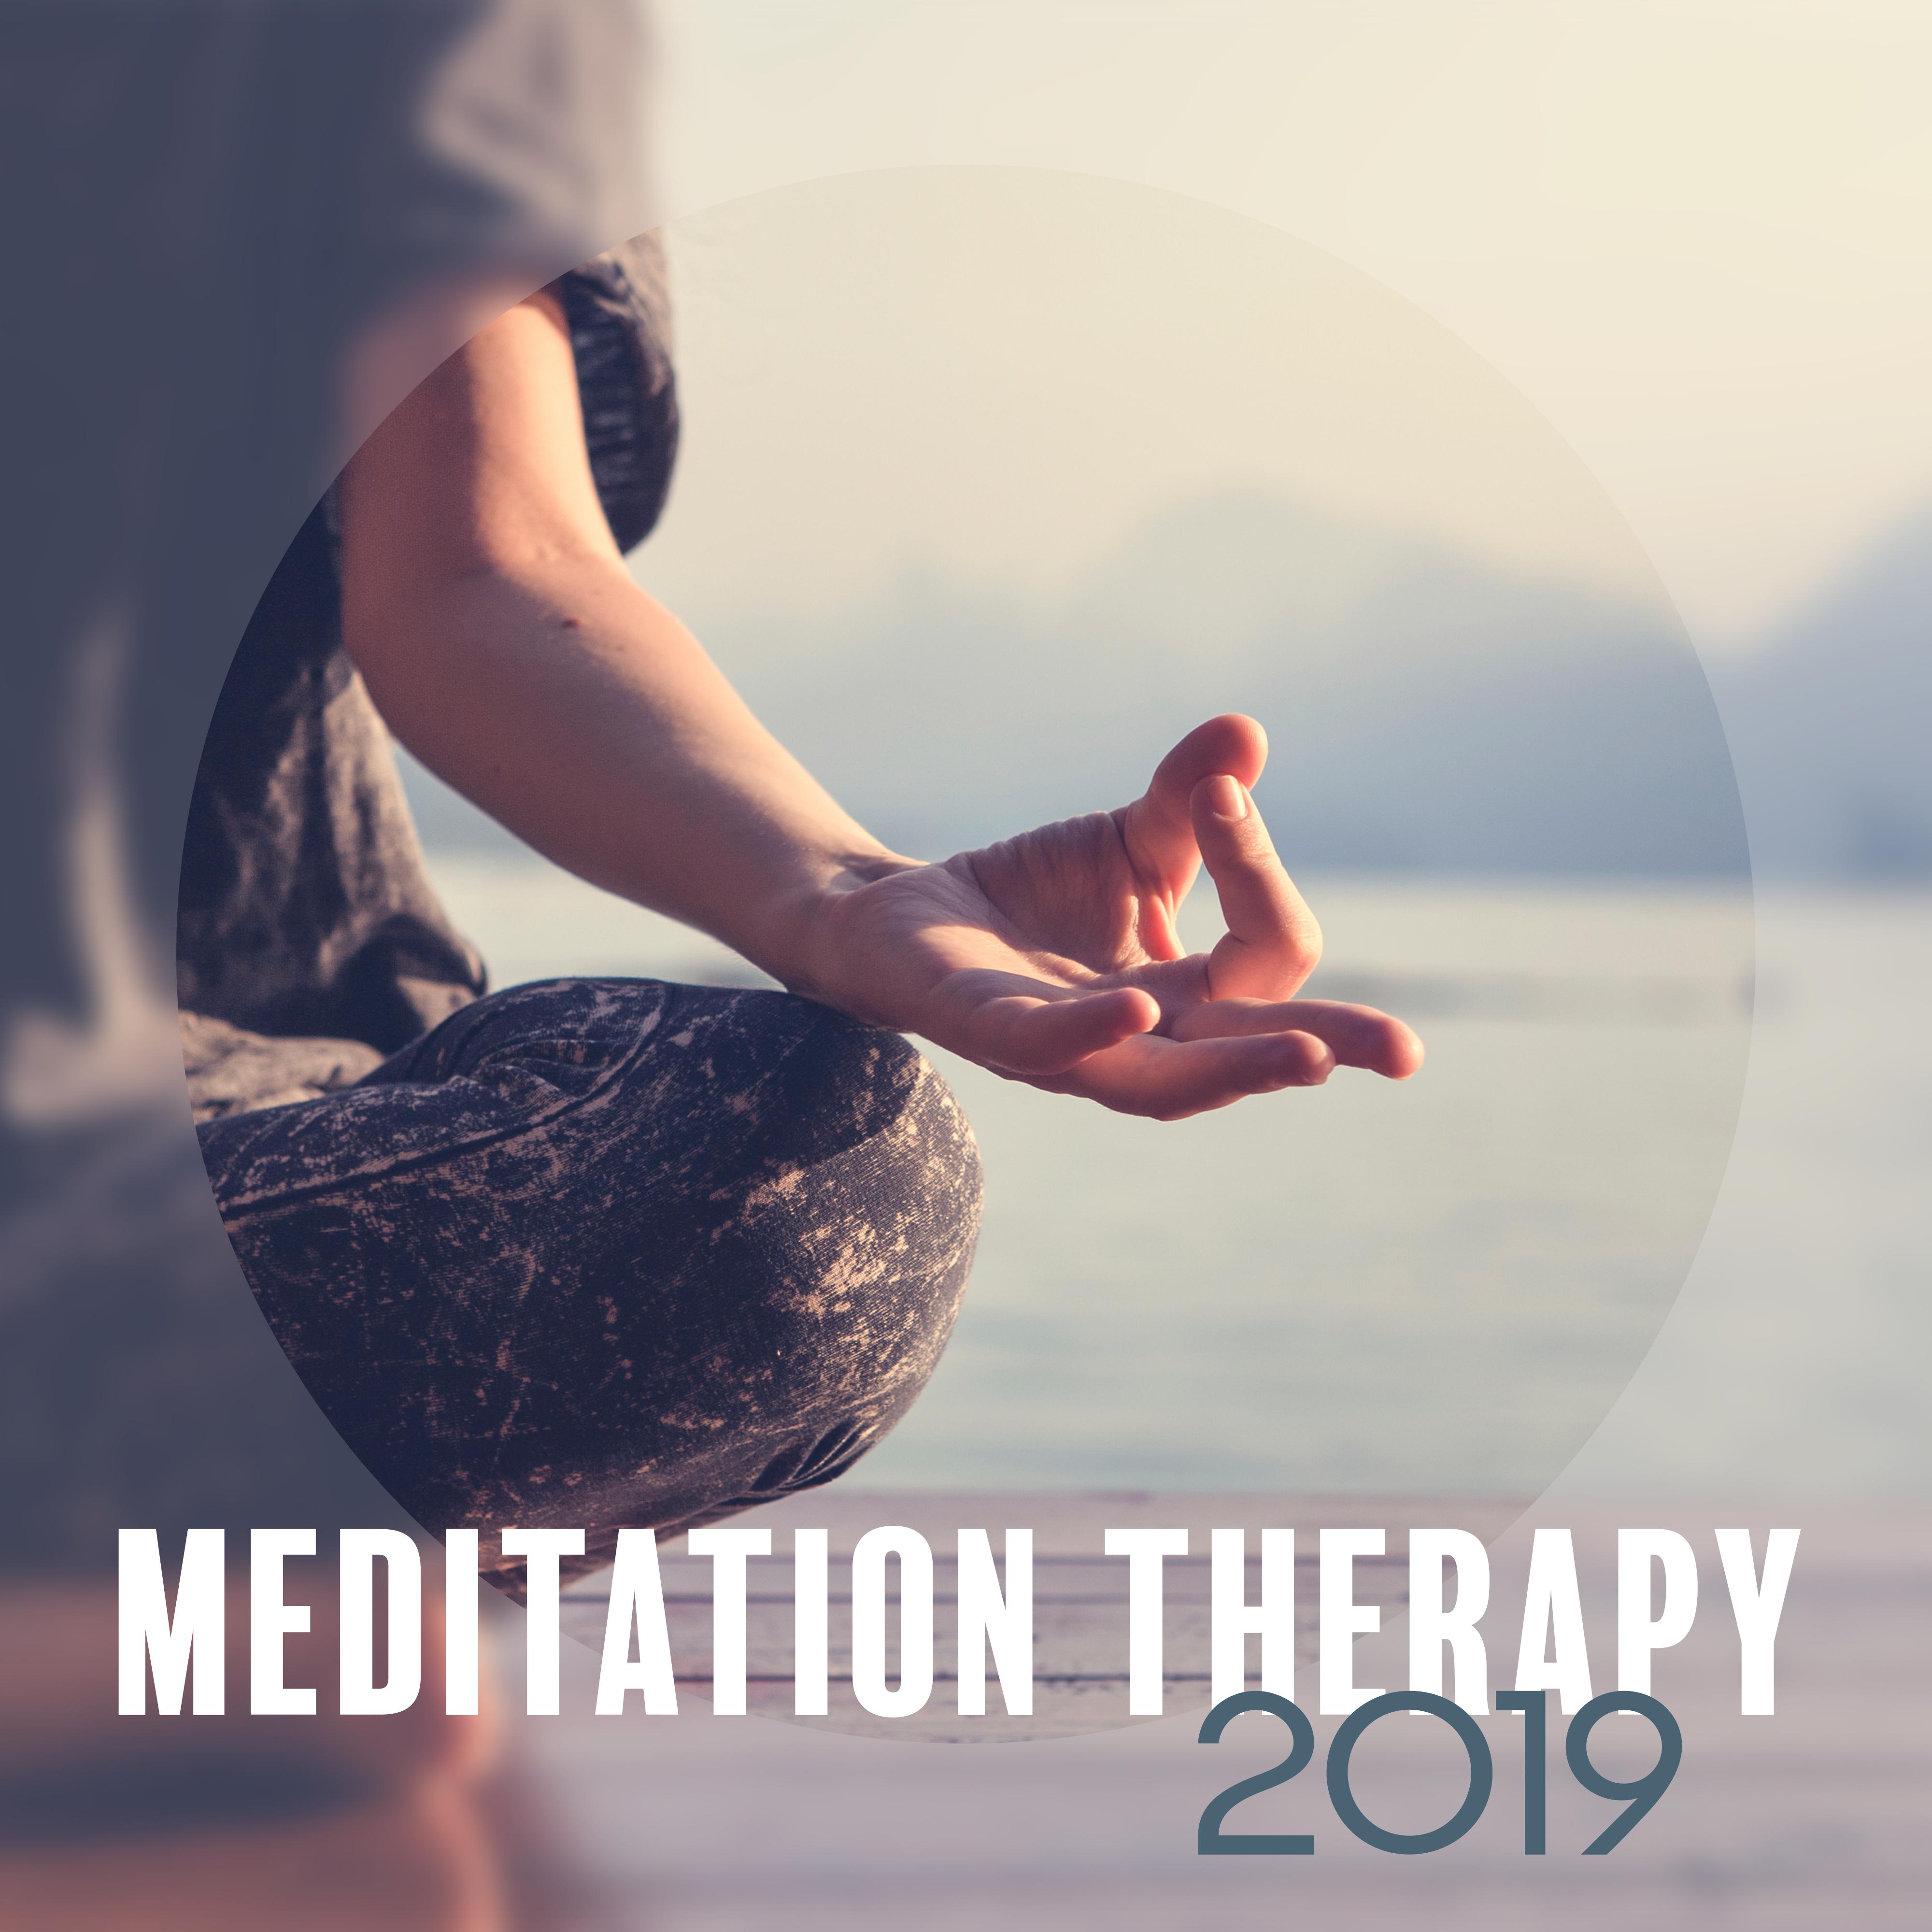 Meditation Therapy 2019  Calming Sounds for Relaxation, Deep Meditation, Yoga, Total Meditation Awareness, Meditation Music Zone, Stress Relief